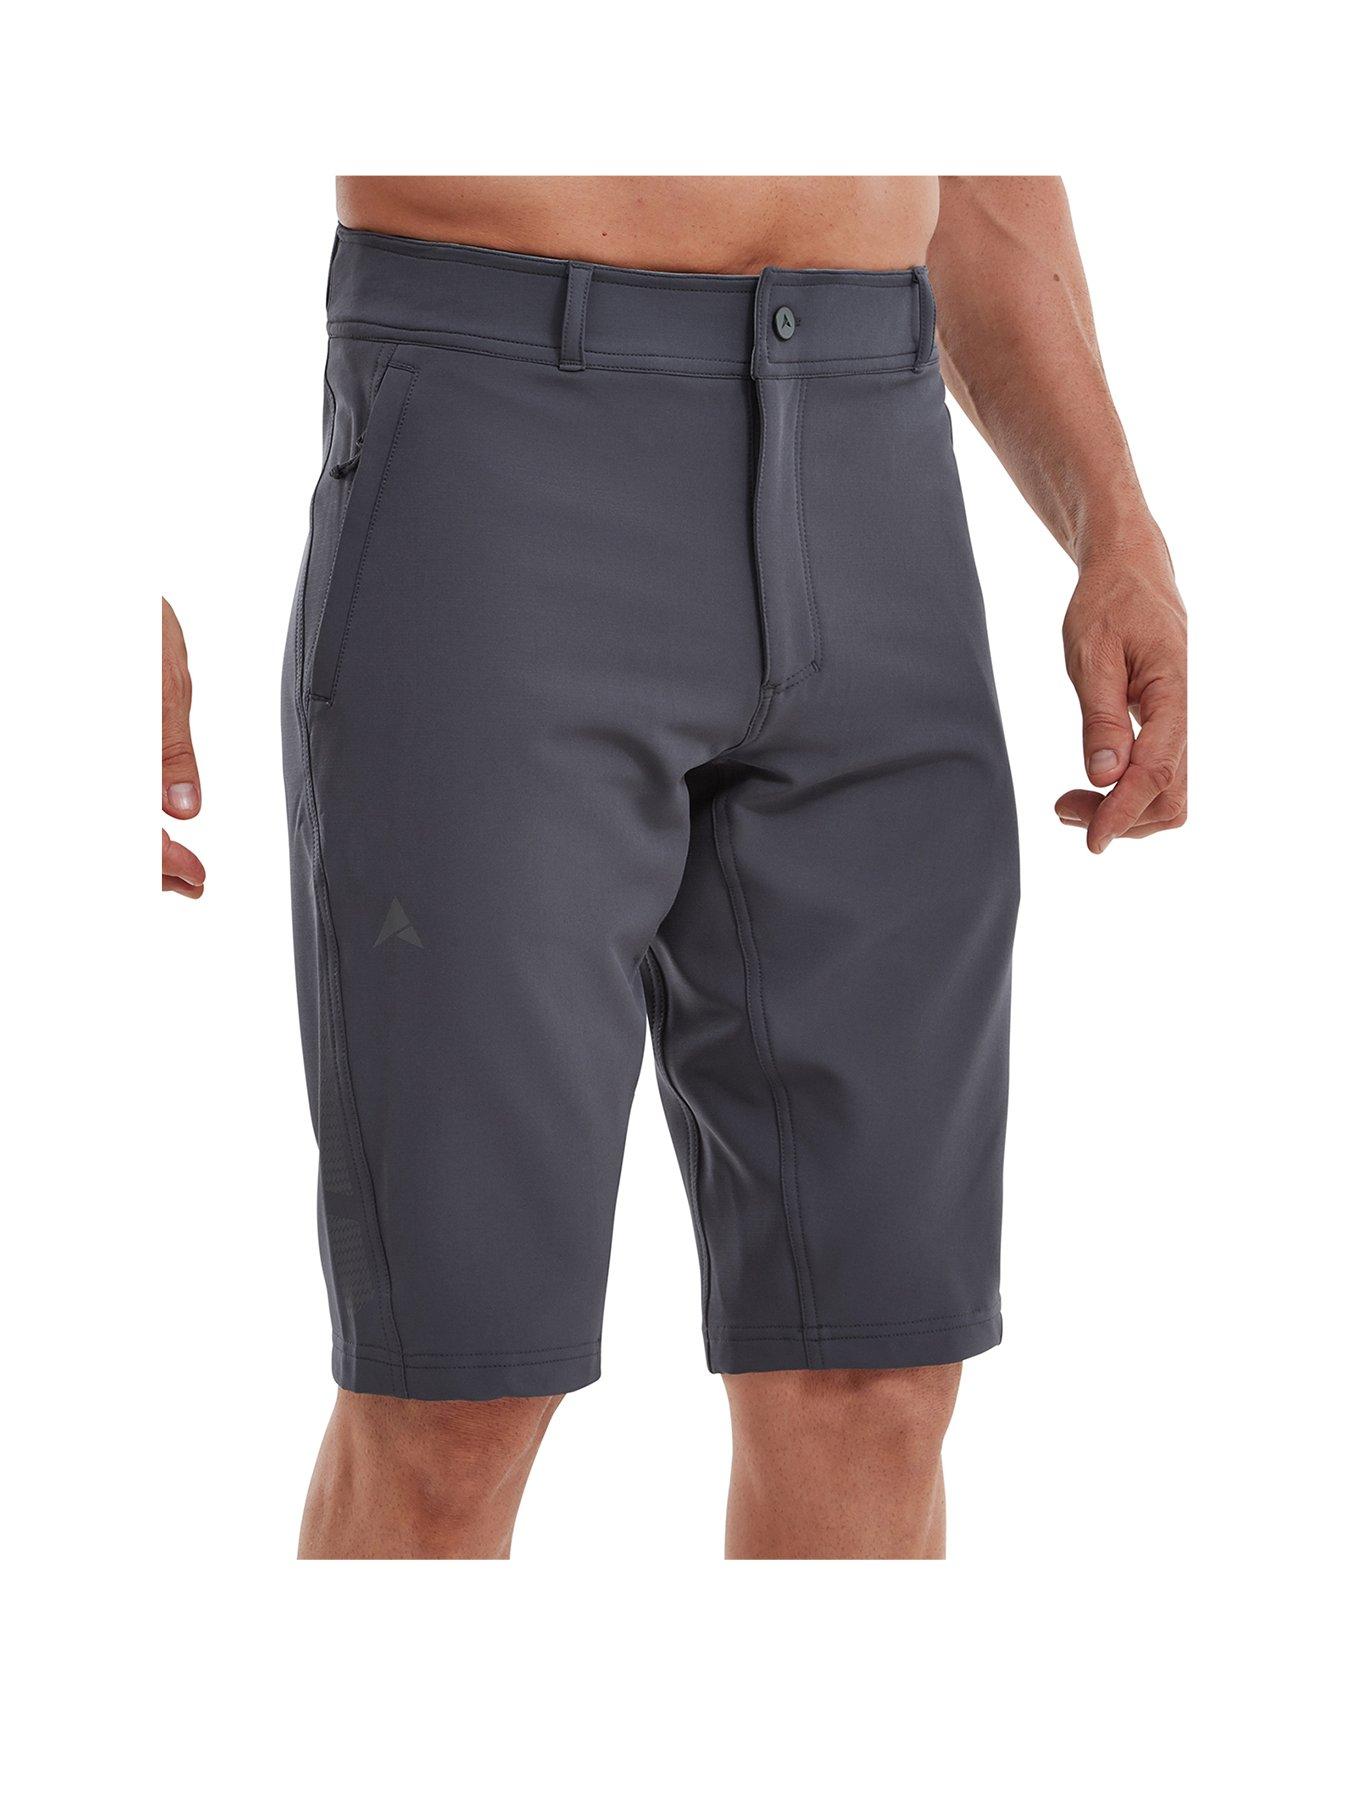 Altura All Roads X Baggy Shorts Homme